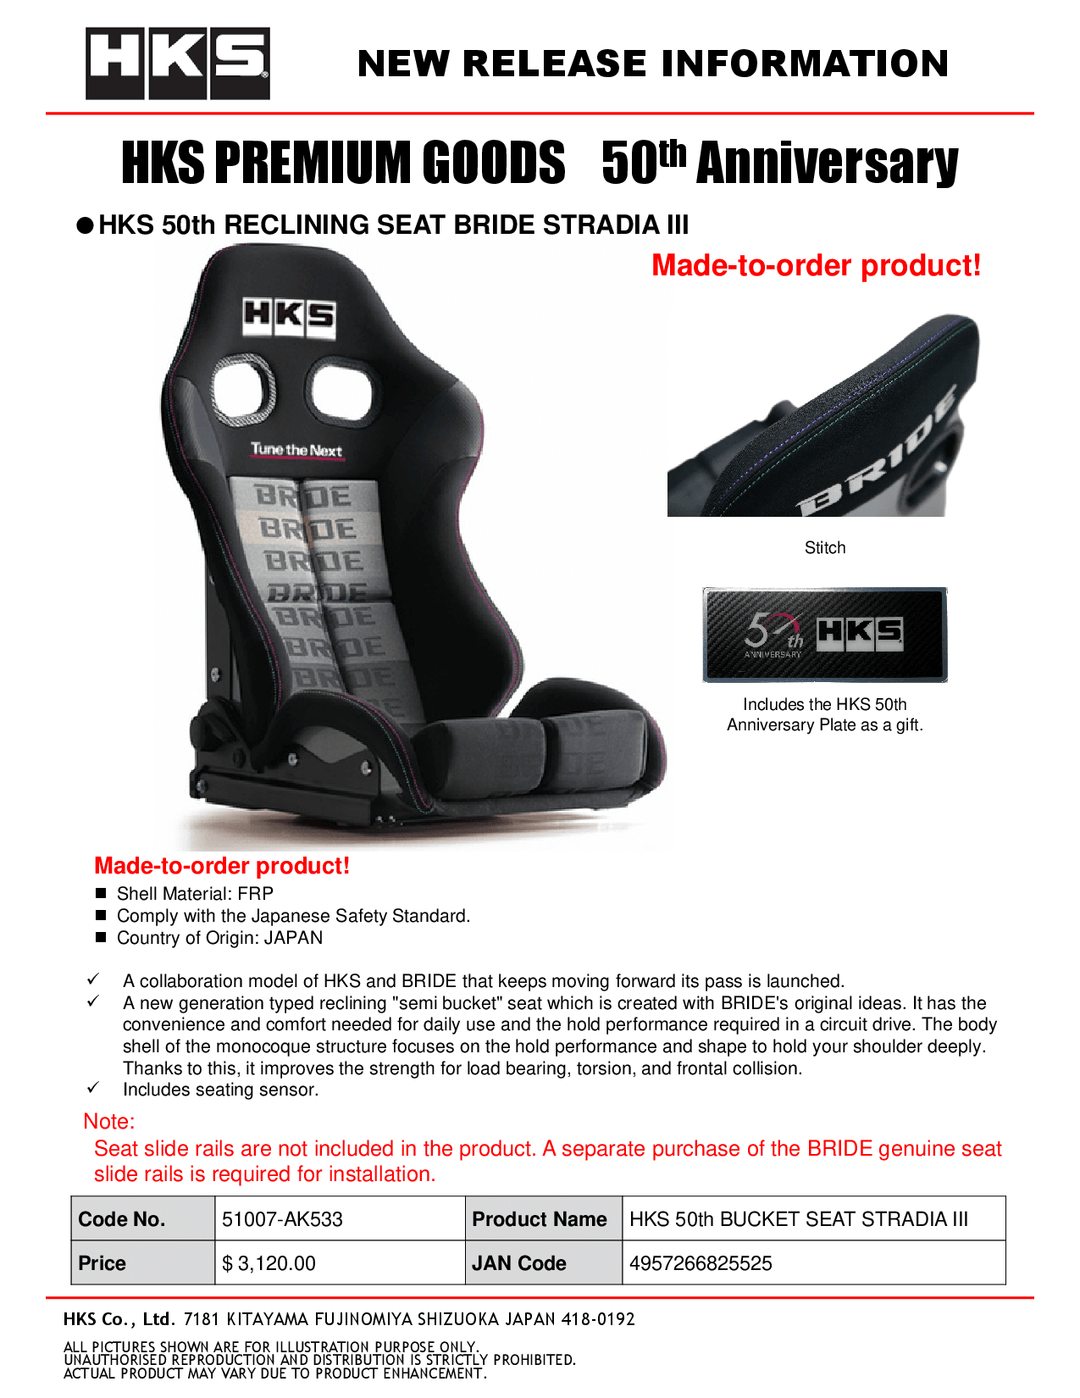 BRIDE x HKS 50th Anniversary Bucket Seat STRADIA III *available now*